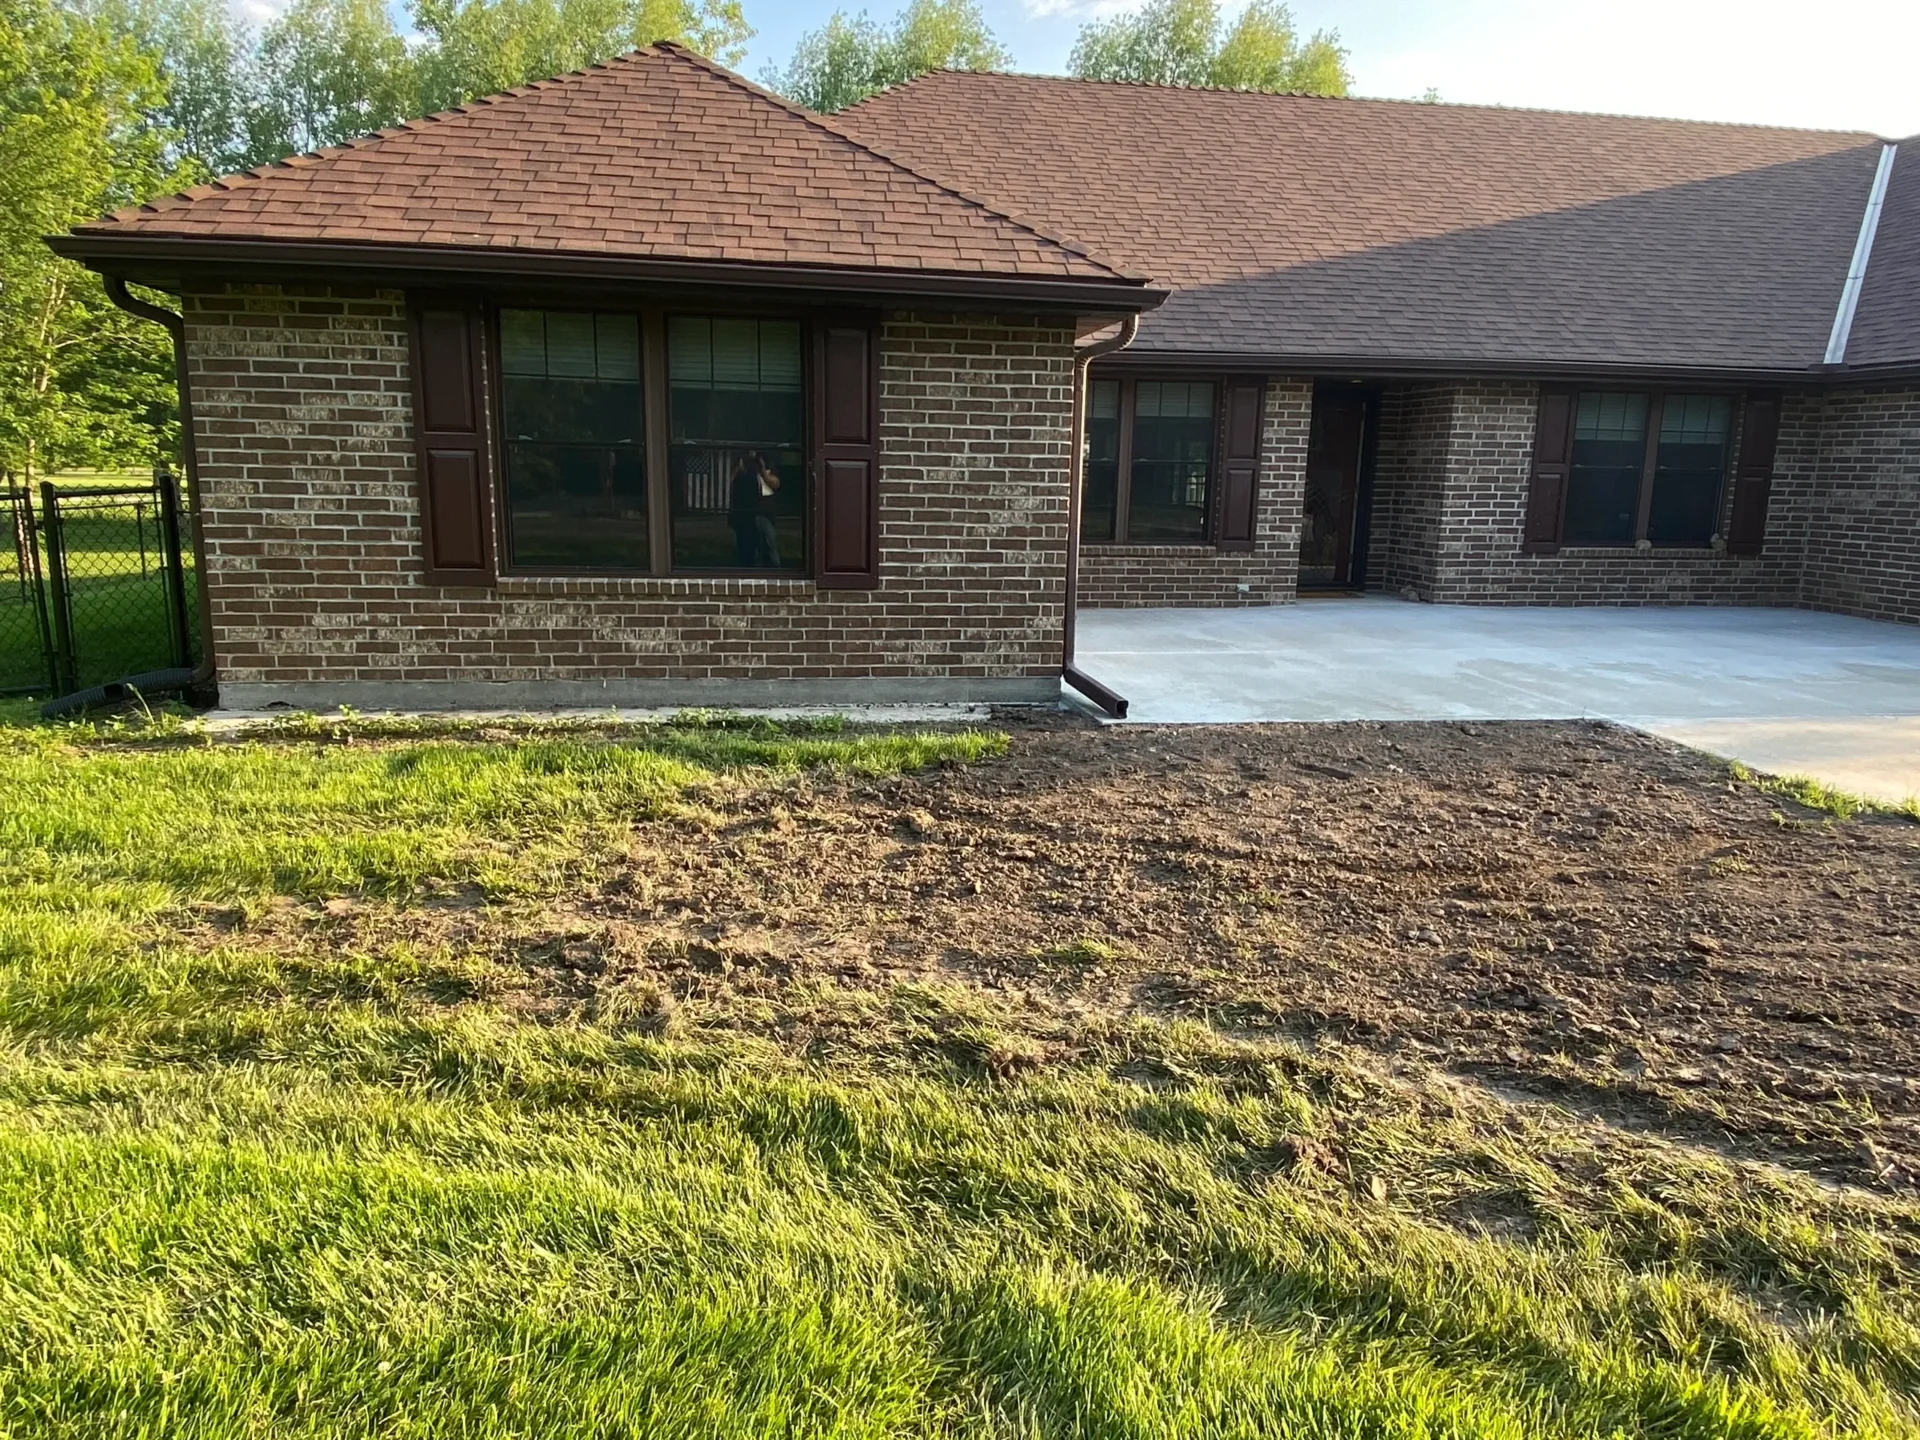 A house that is being remodeled with grass growing.